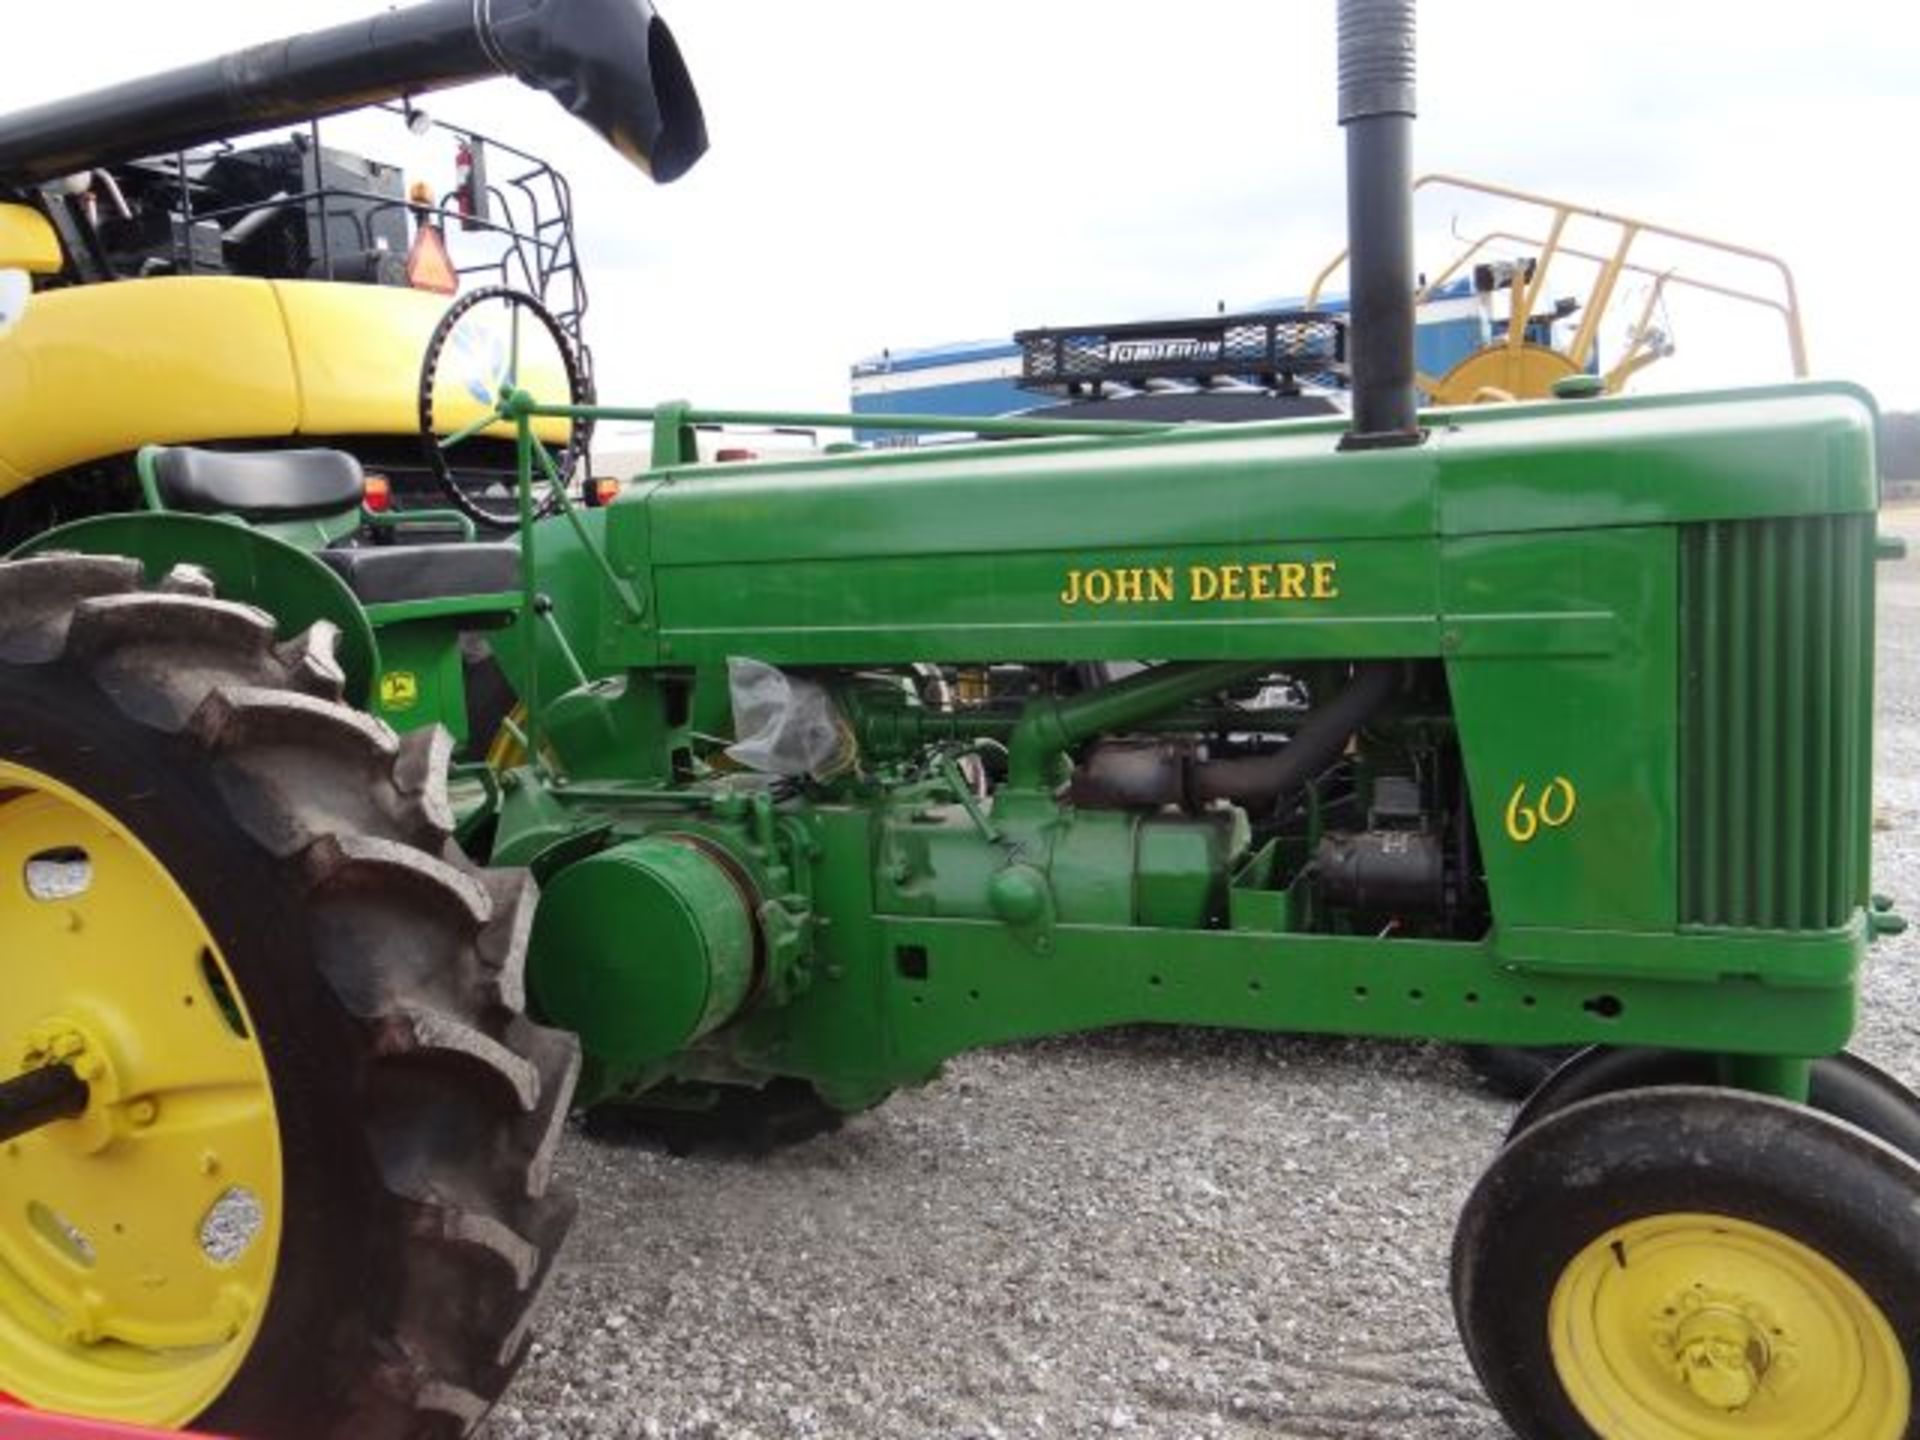 JD 60 Tractor, 1953 Dual Fuel, Rebuilt Motor, New Rings & Bearings, All New Gaskets, New Radiator, - Image 5 of 5